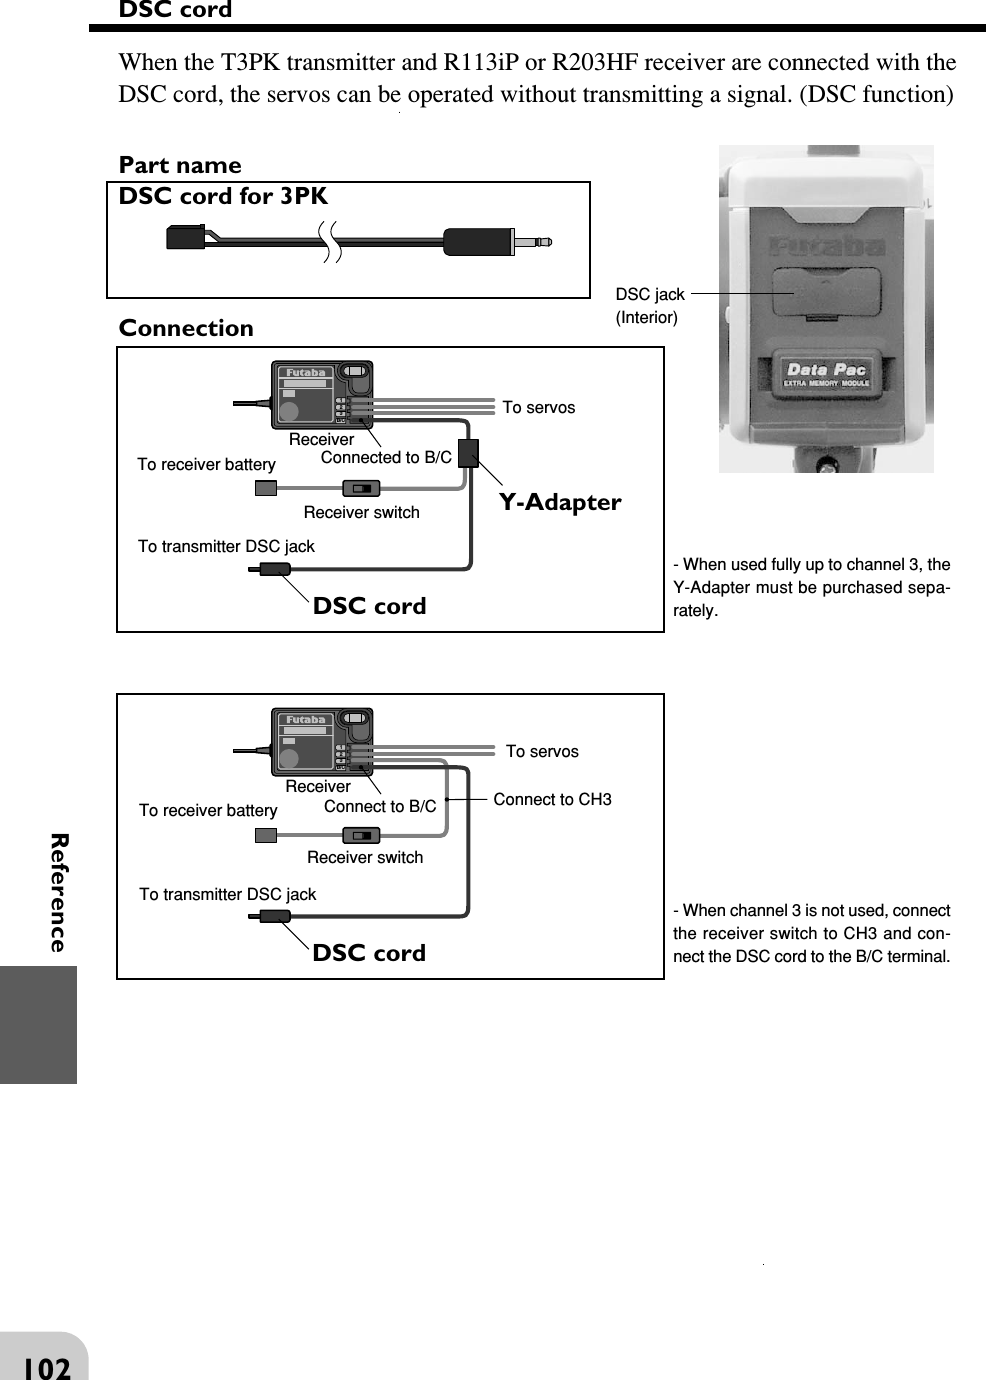 102Reference123B/C123B/CDSC cordWhen the T3PK transmitter and R113iP or R203HF receiver are connected with theDSC cord, the servos can be operated without transmitting a signal. (DSC function)Part nameDSC cord for 3PKConnection- When used fully up to channel 3, theY-Adapter must be purchased sepa-rately.To servosReceiverConnected to B/CY-AdapterTo receiver batteryReceiver switchTo transmitter DSC jackDSC cord- When channel 3 is not used, connectthe receiver switch to CH3 and con-nect the DSC cord to the B/C terminal.To servosReceiverConnect to B/C Connect to CH3To receiver batteryReceiver switchTo transmitter DSC jackDSC cordDSC jack(Interior)